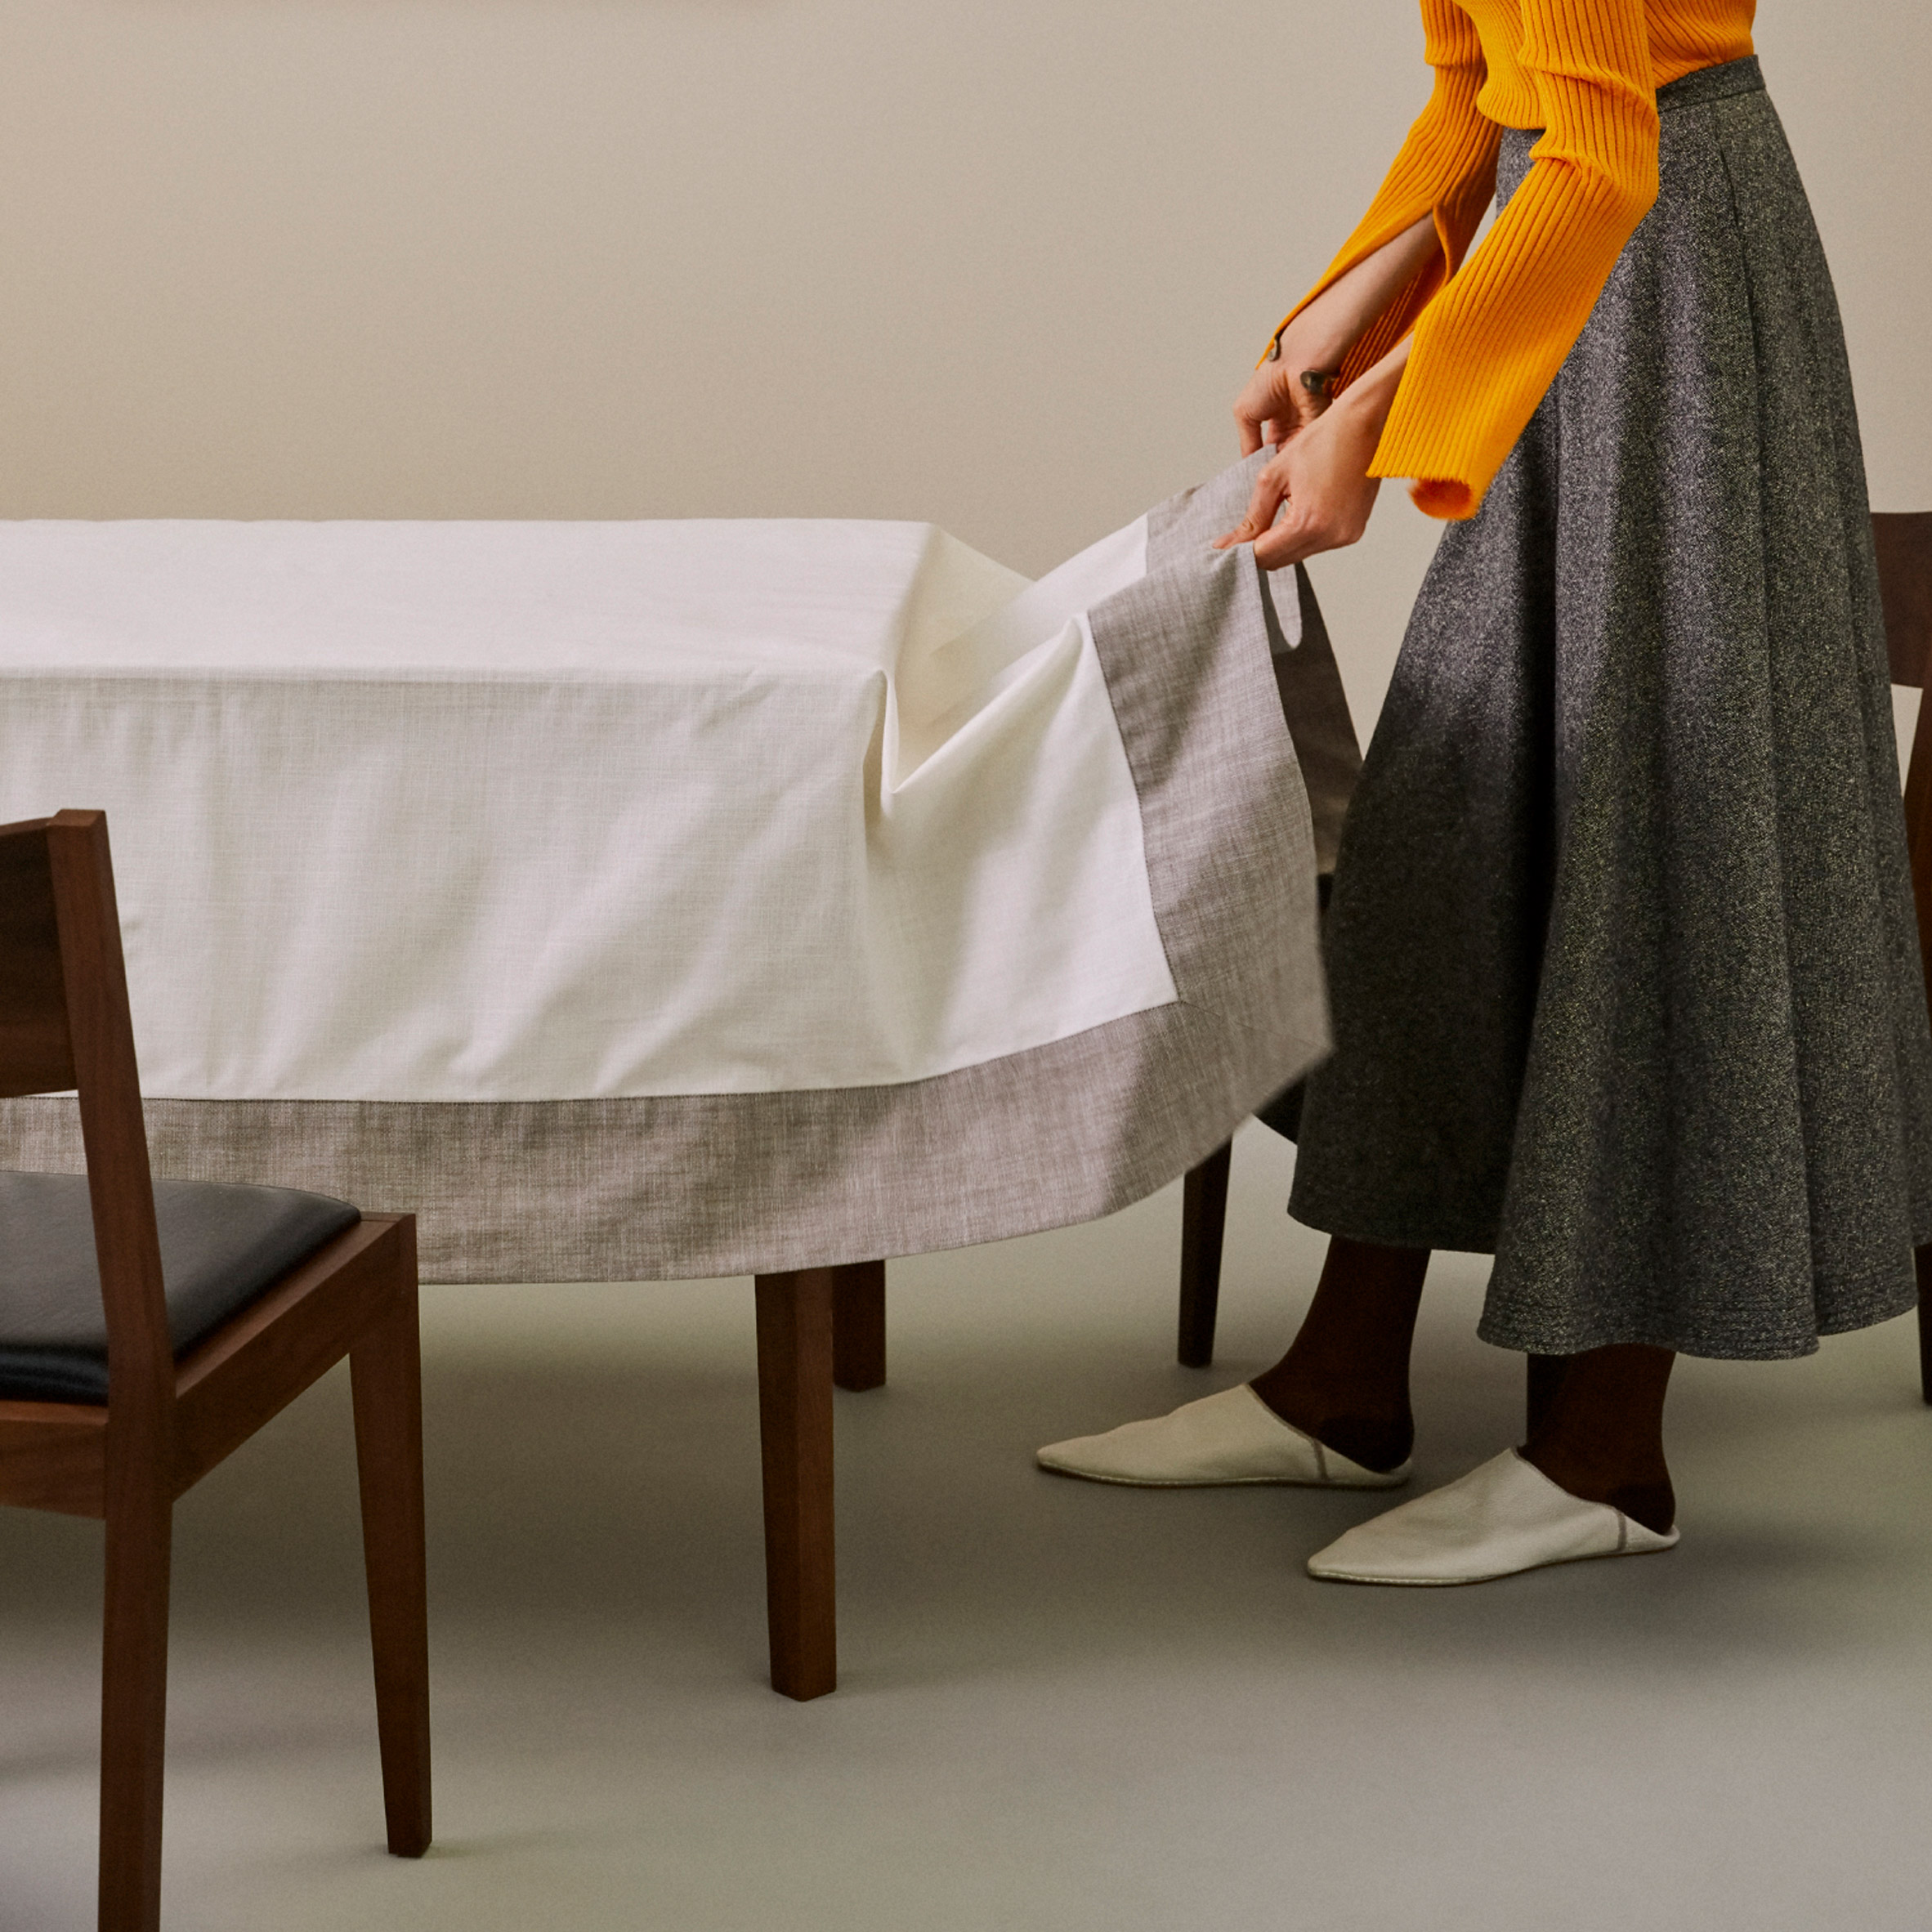 Person laying tablecloth by Japanese brand Eterble on table